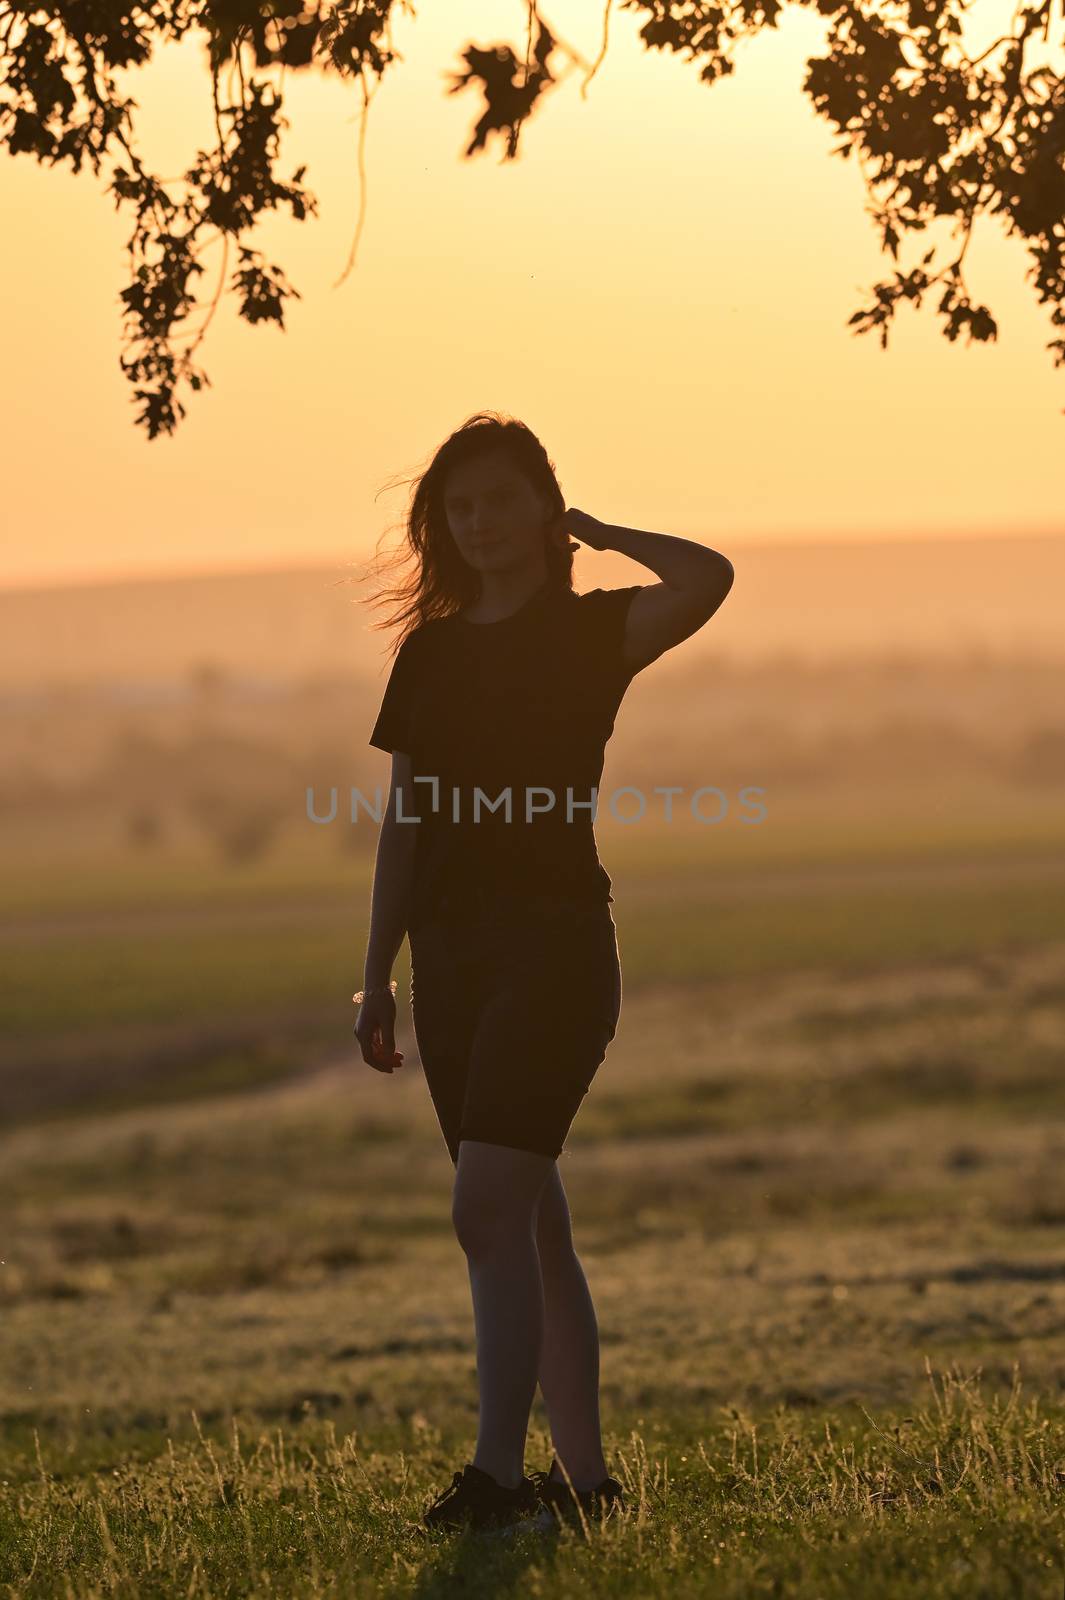 Portrait of young woman silhouette at sunset